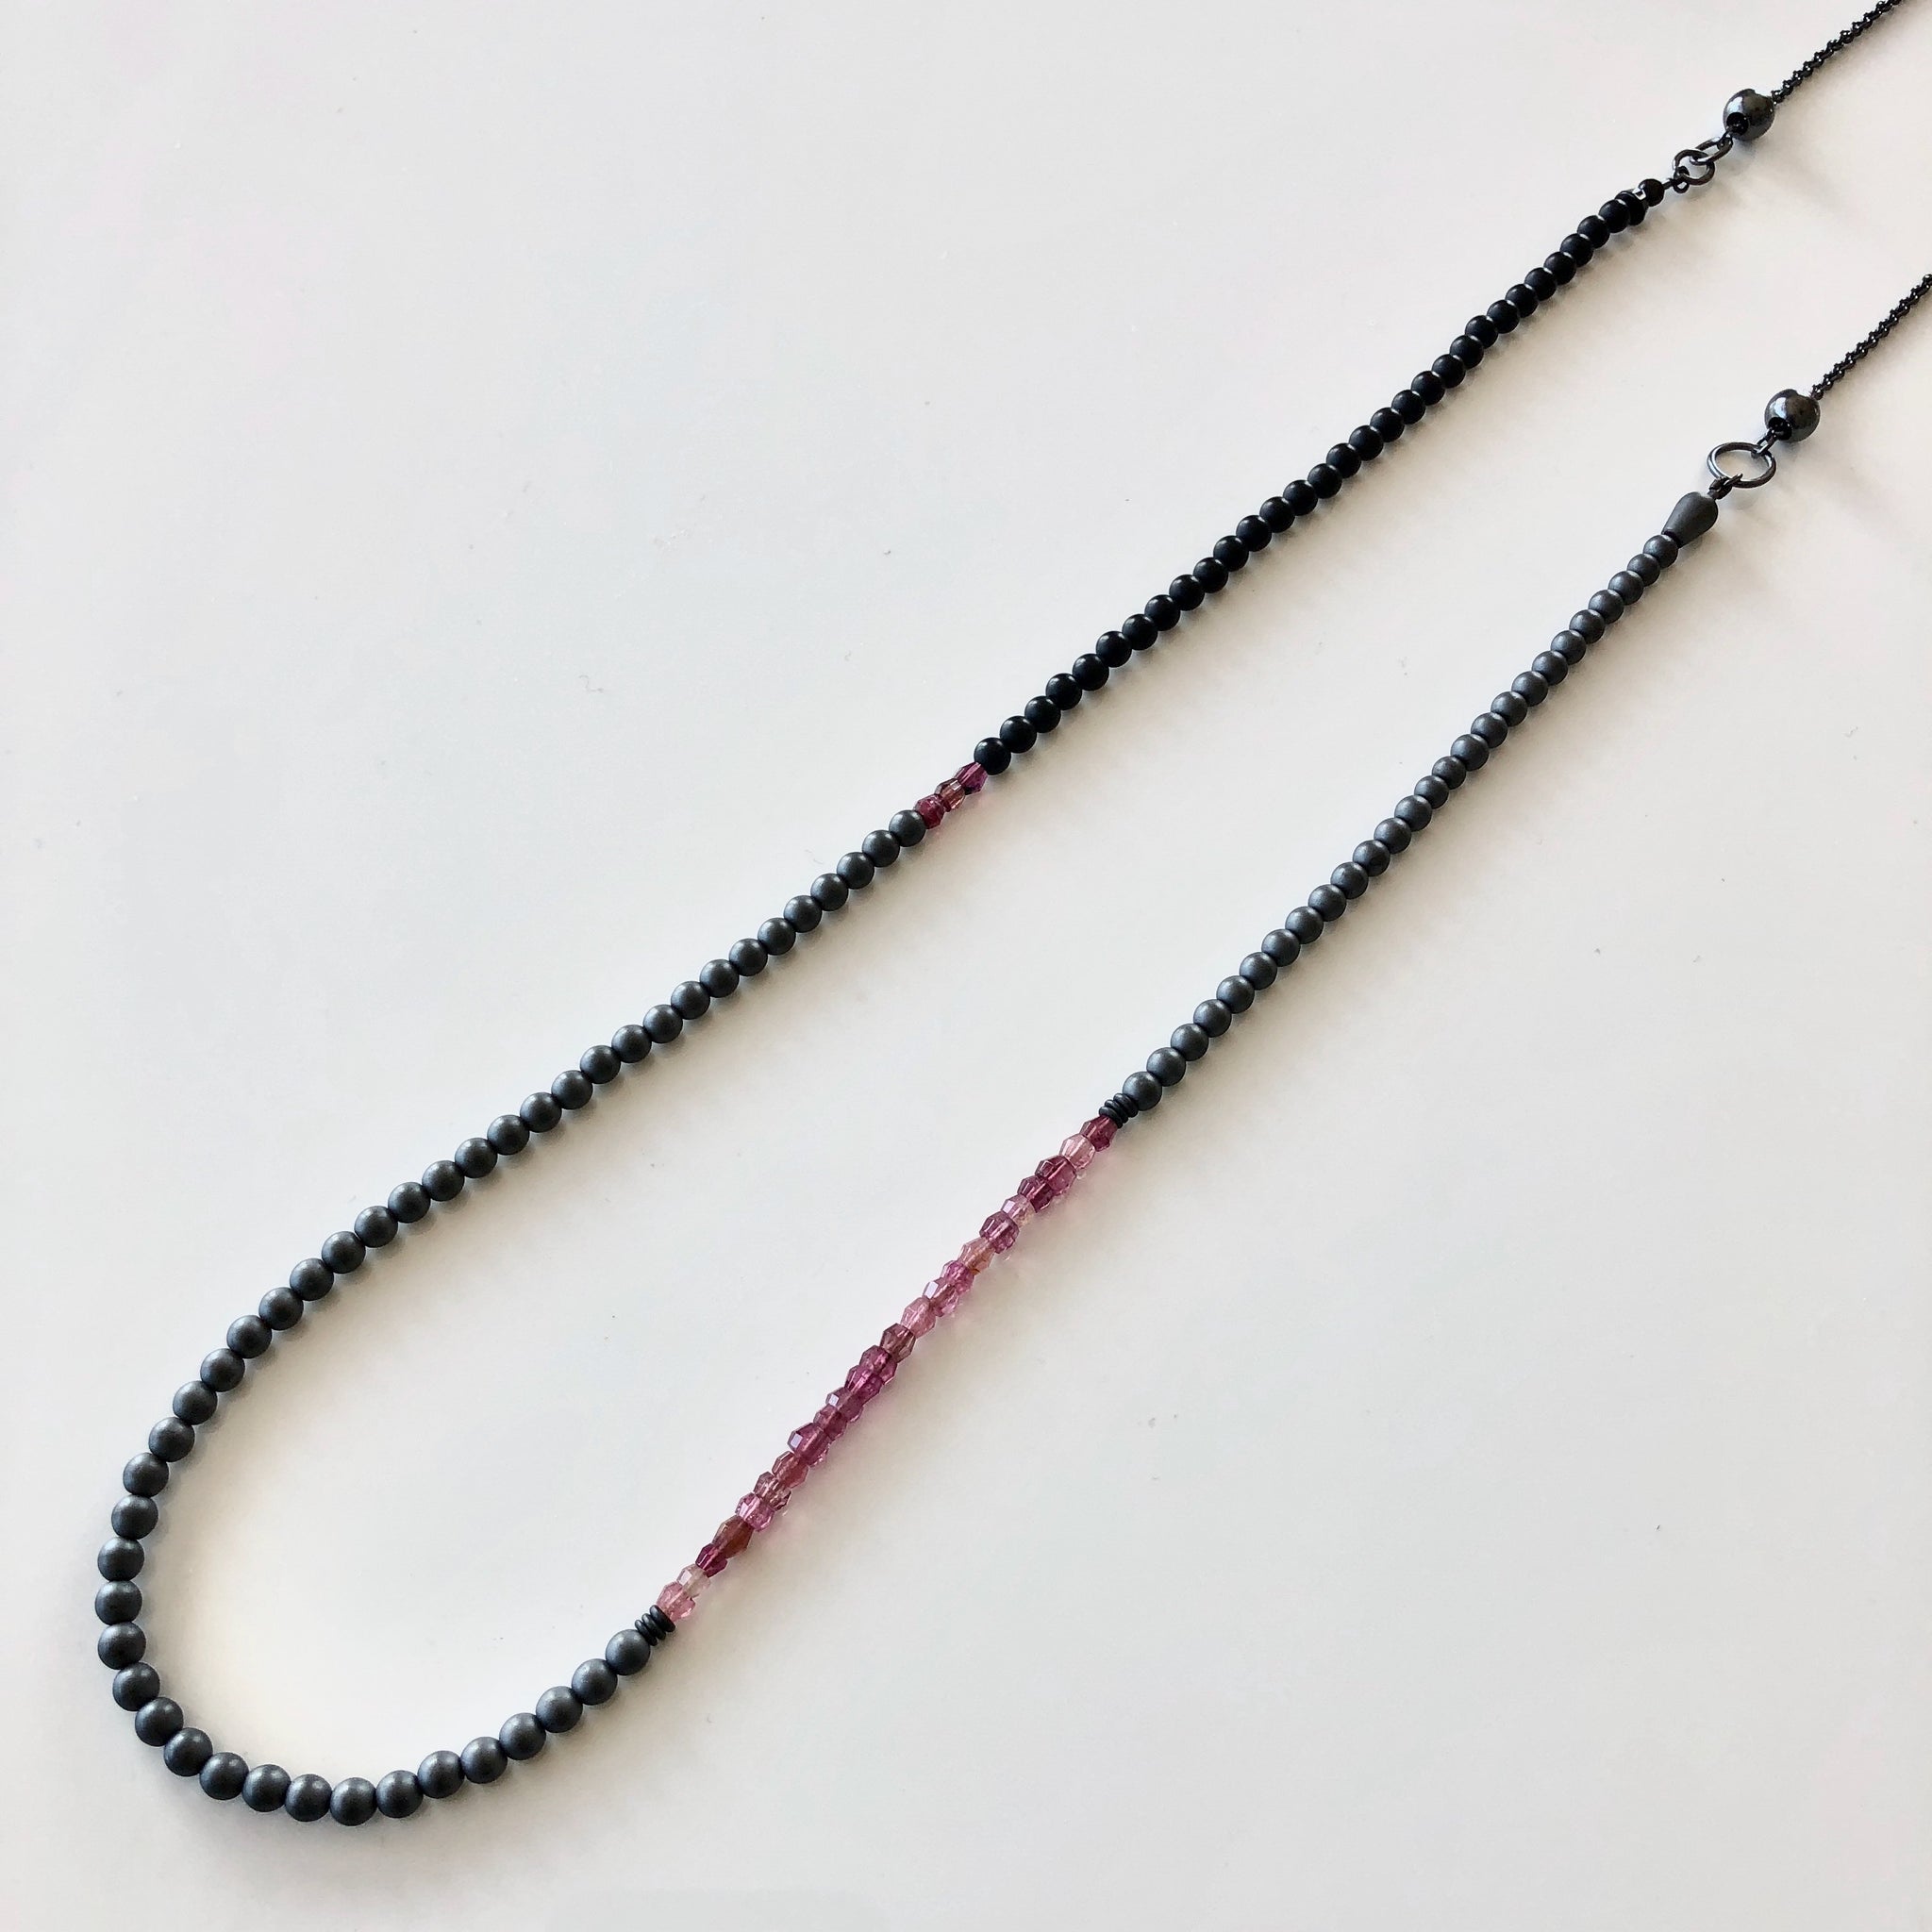 Long Beaded Necklace, Pink Tourmalines